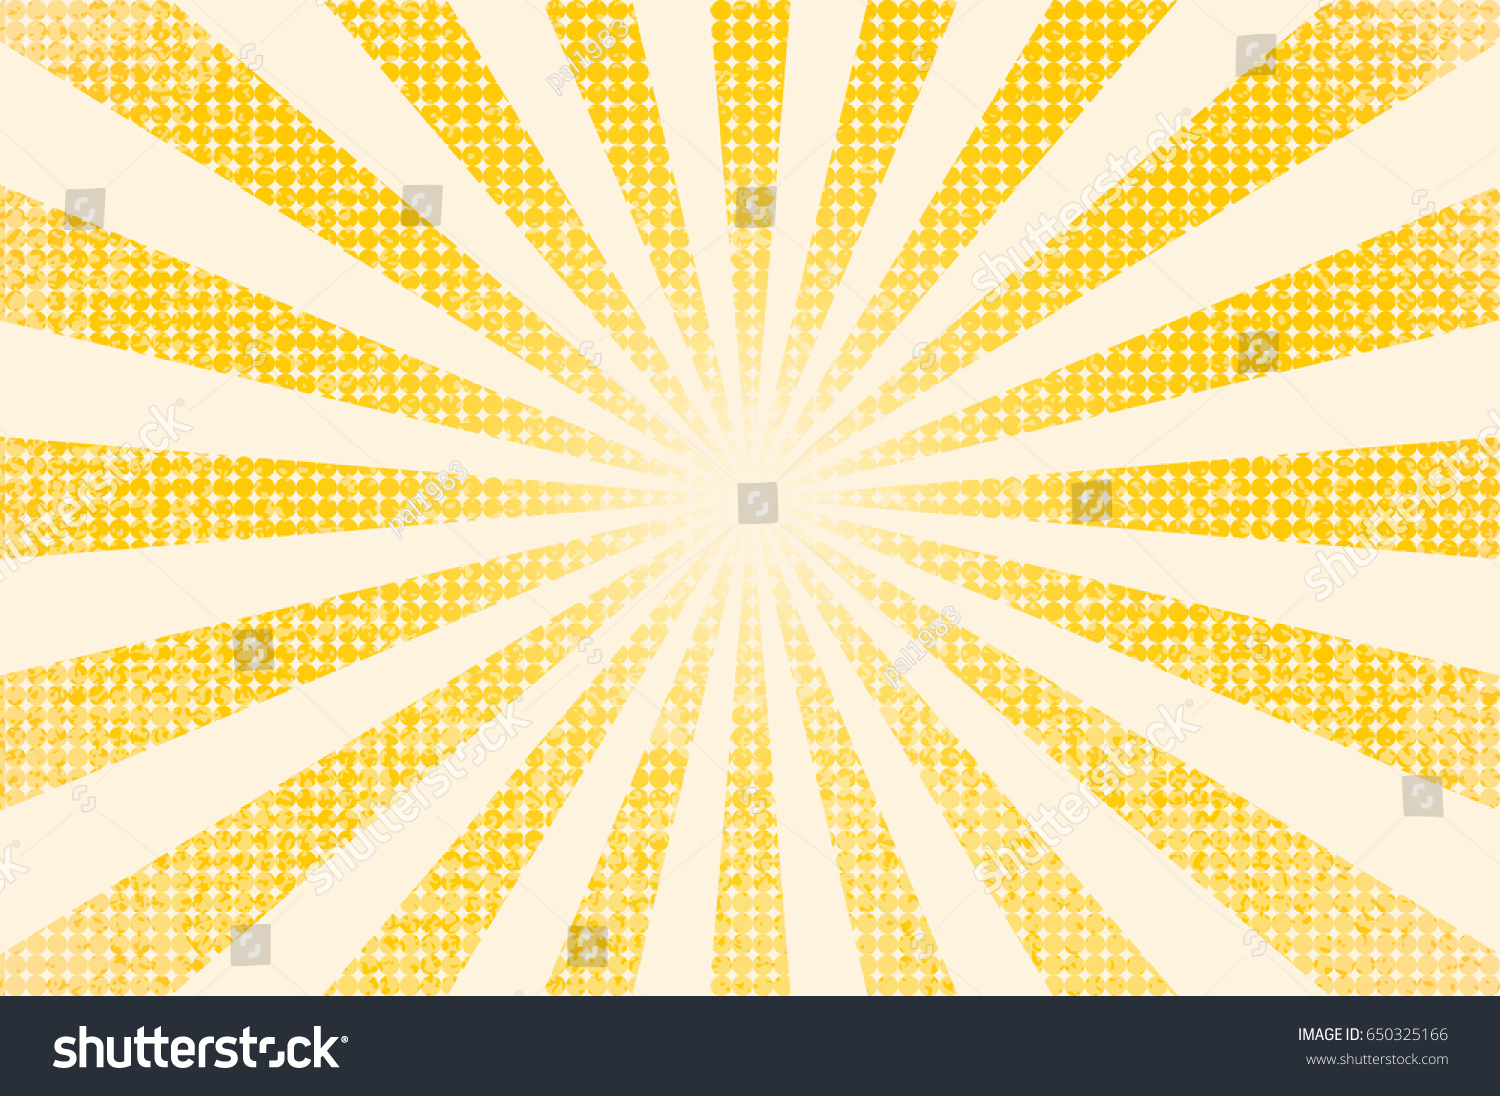 horizontal vector illustration of a grunge background of yellow color. divergent rays. the simulation of old printed materials. #650325166